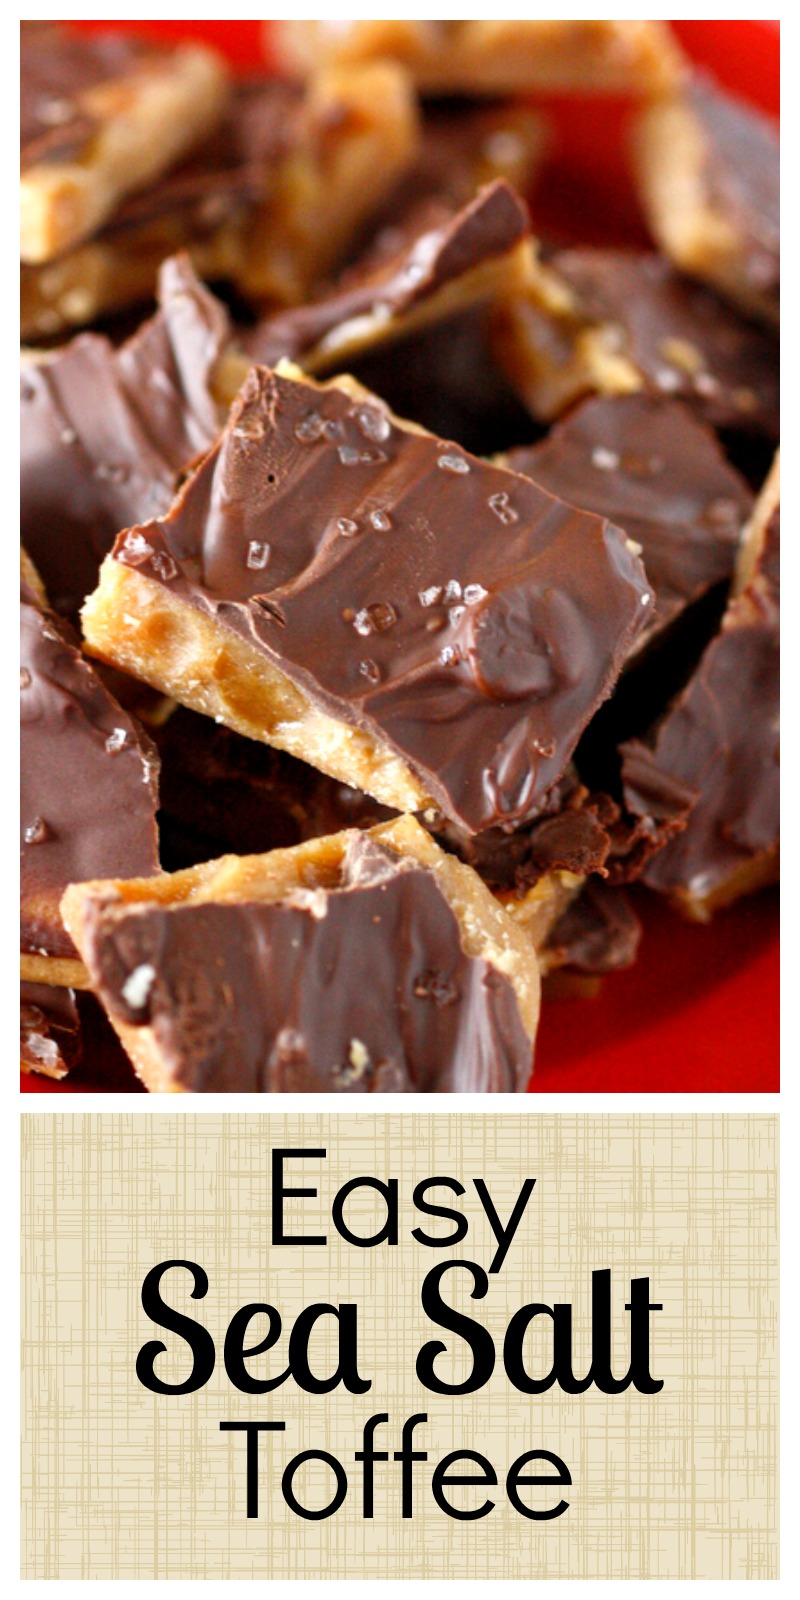 Easy Sea Salt Toffee - only 4 ingredients, and seriously addictive!